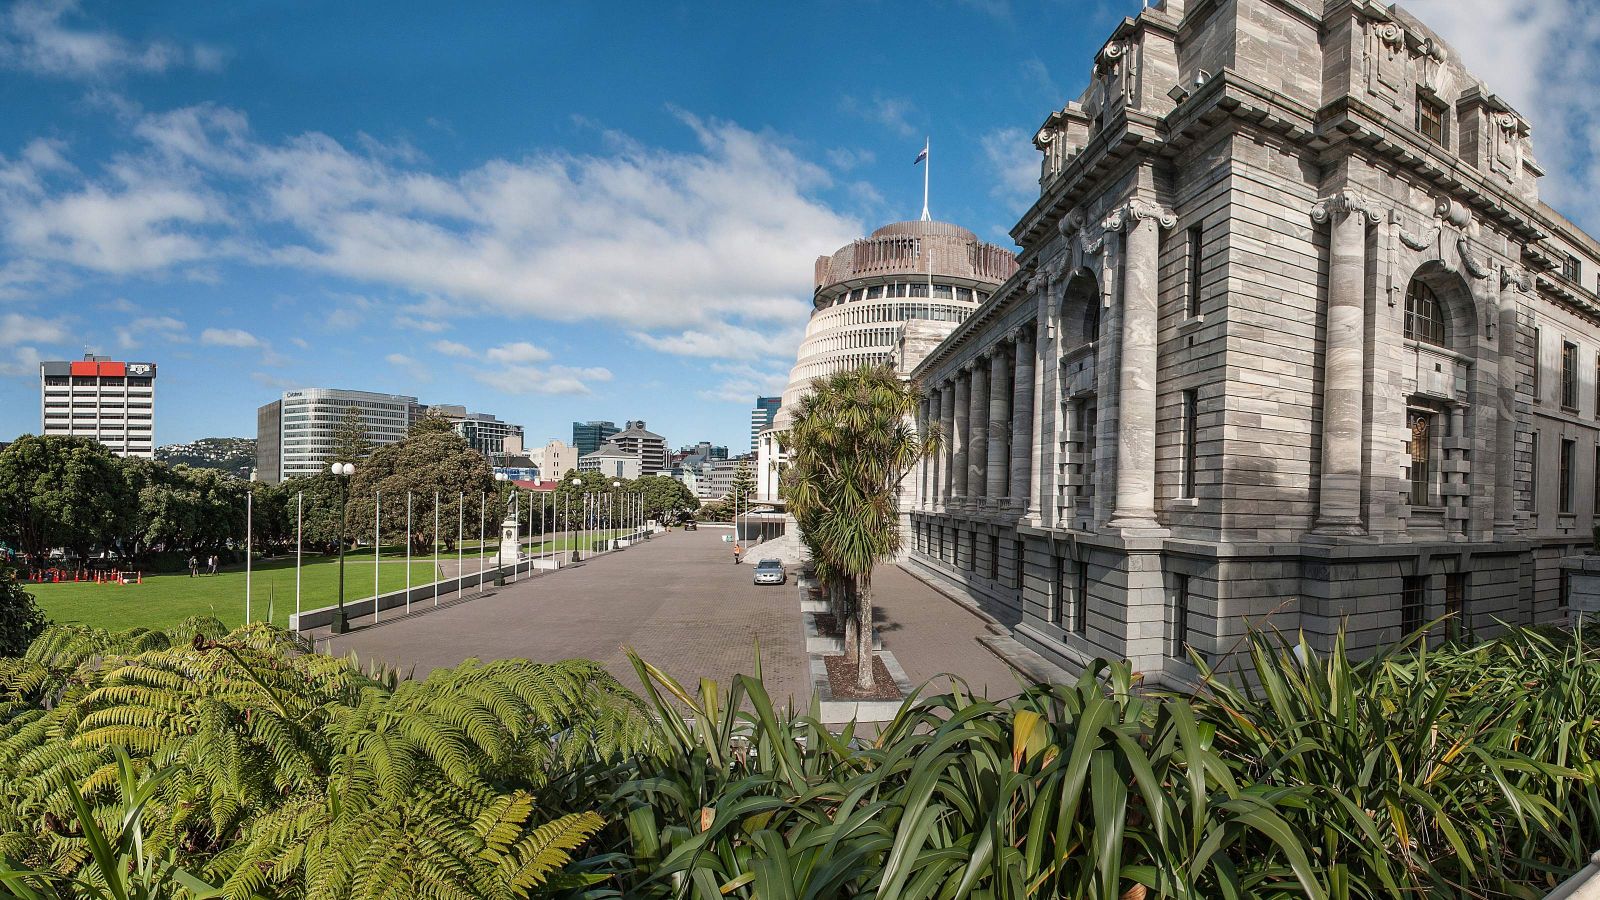 Pipitea campus opposite the Beehive, NZ's government buildings